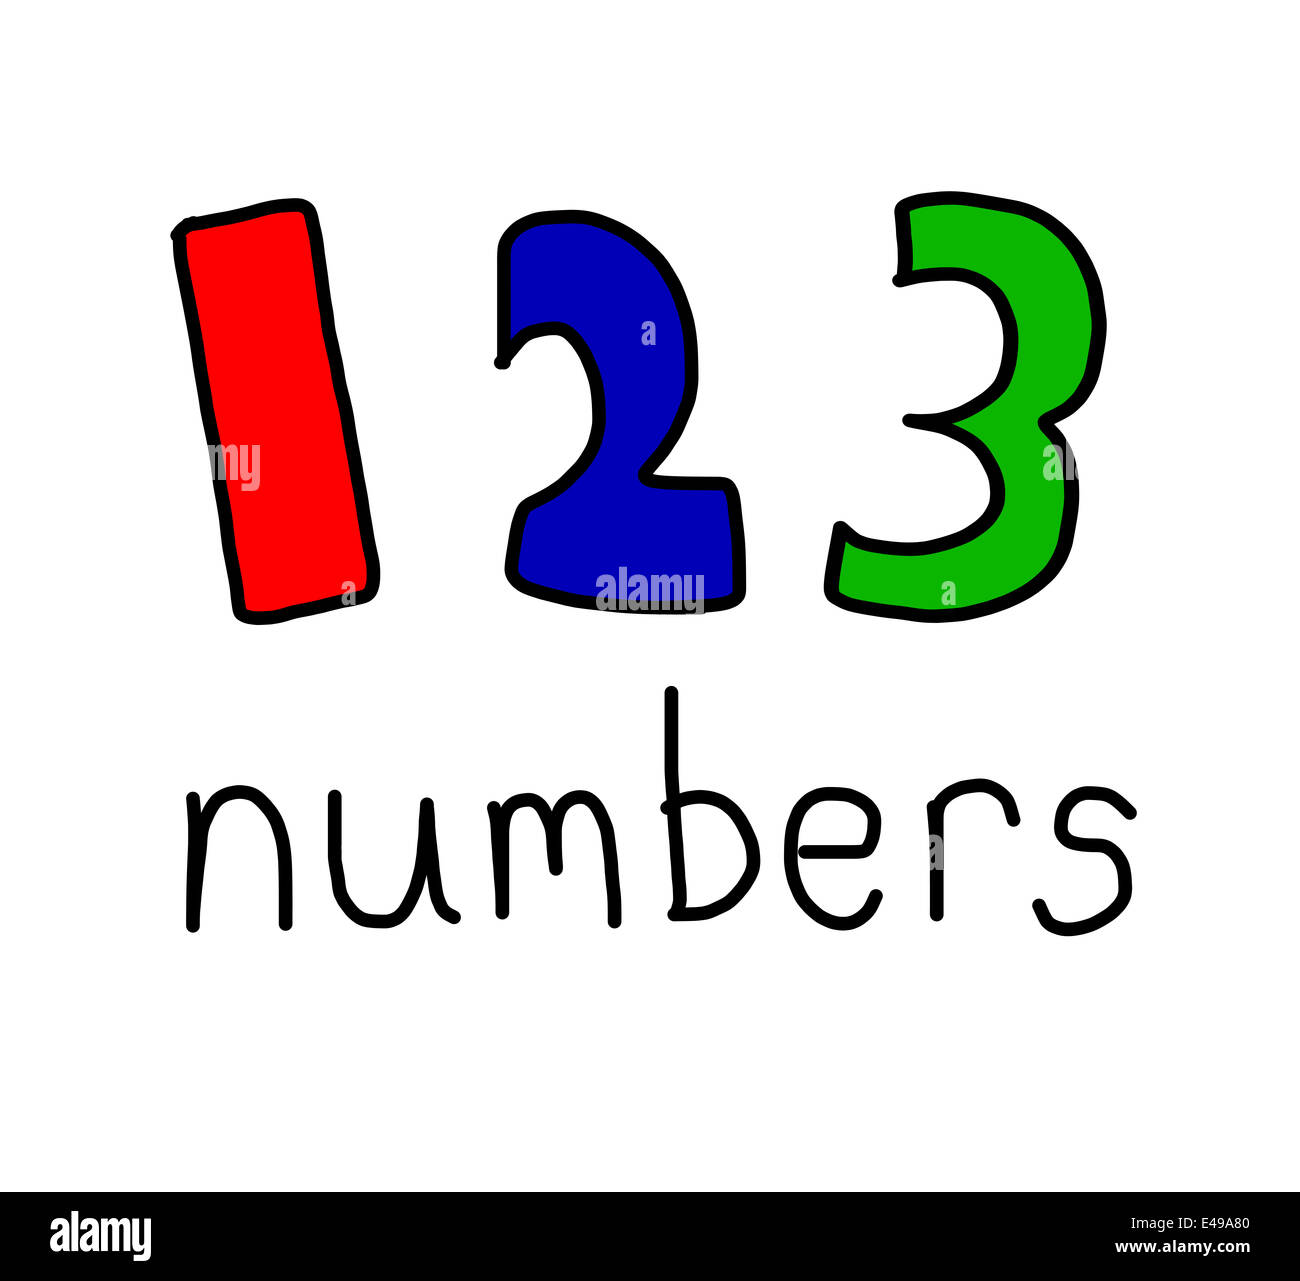 Illustration of alphabet words - numbers Stock Photo